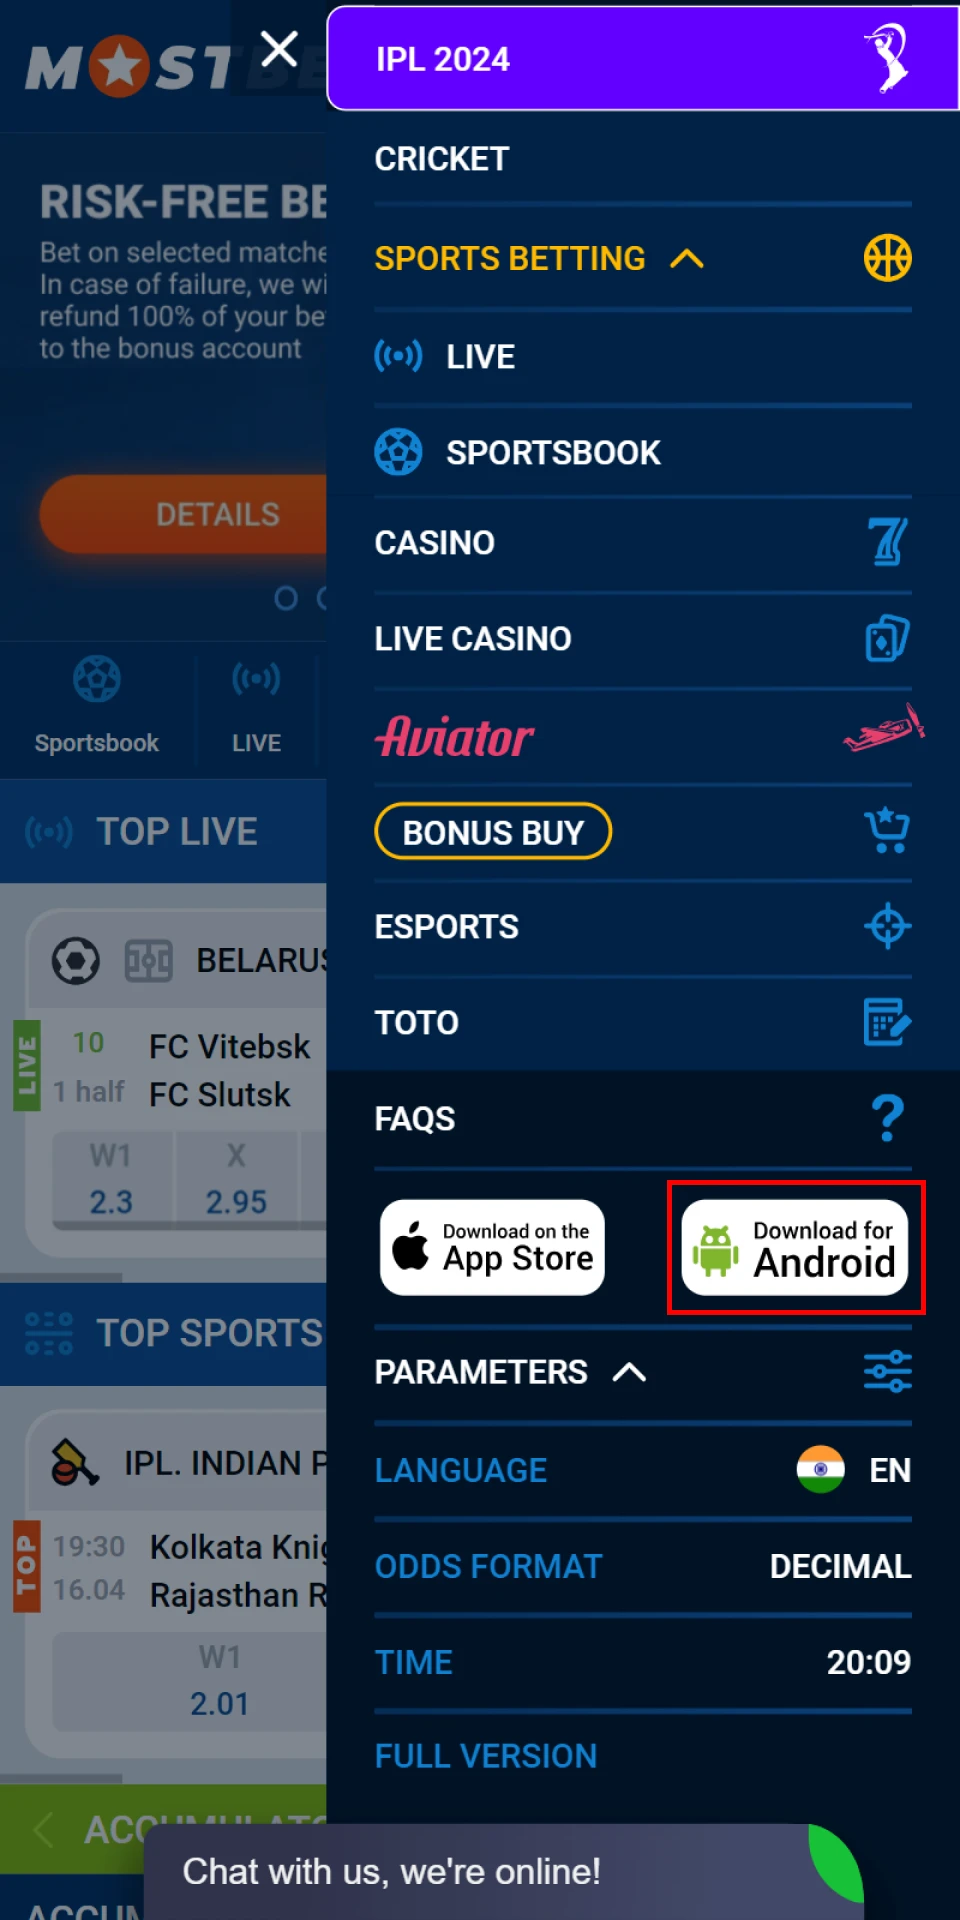 Download the Mostbet app on your iOS device from the official website.